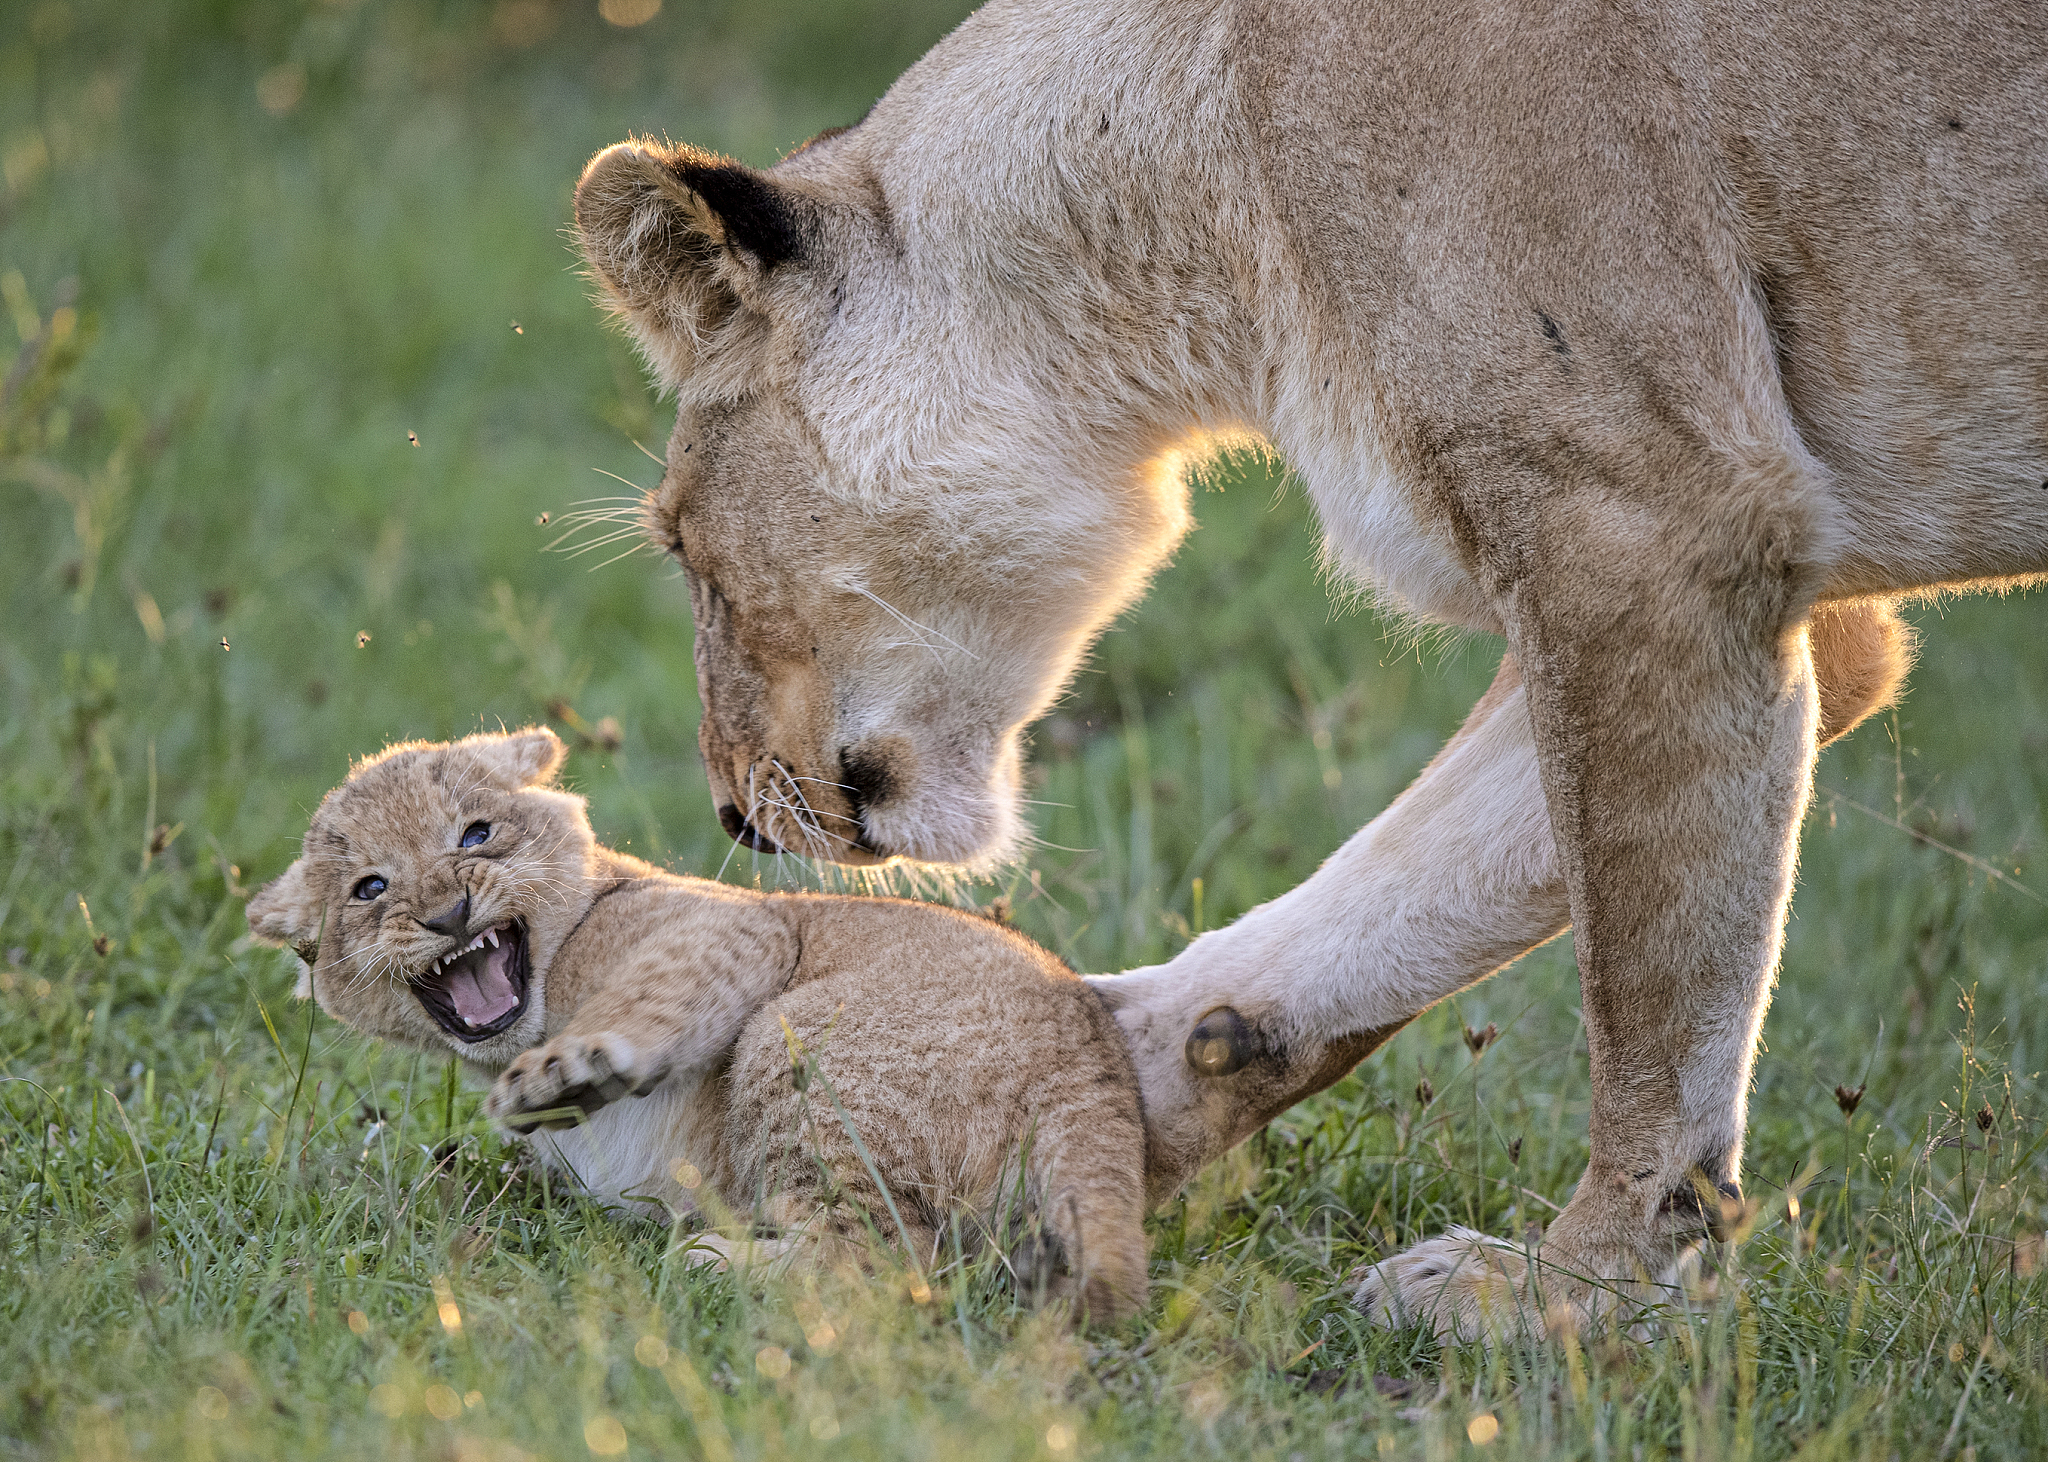 A naughty cub gets into trouble. This undated photo shows a lioness shooing her cub, frustrated that the little one won't leave her in peace. The image was captured in the Maasai Mara National Reserve in Kenya. /CFP